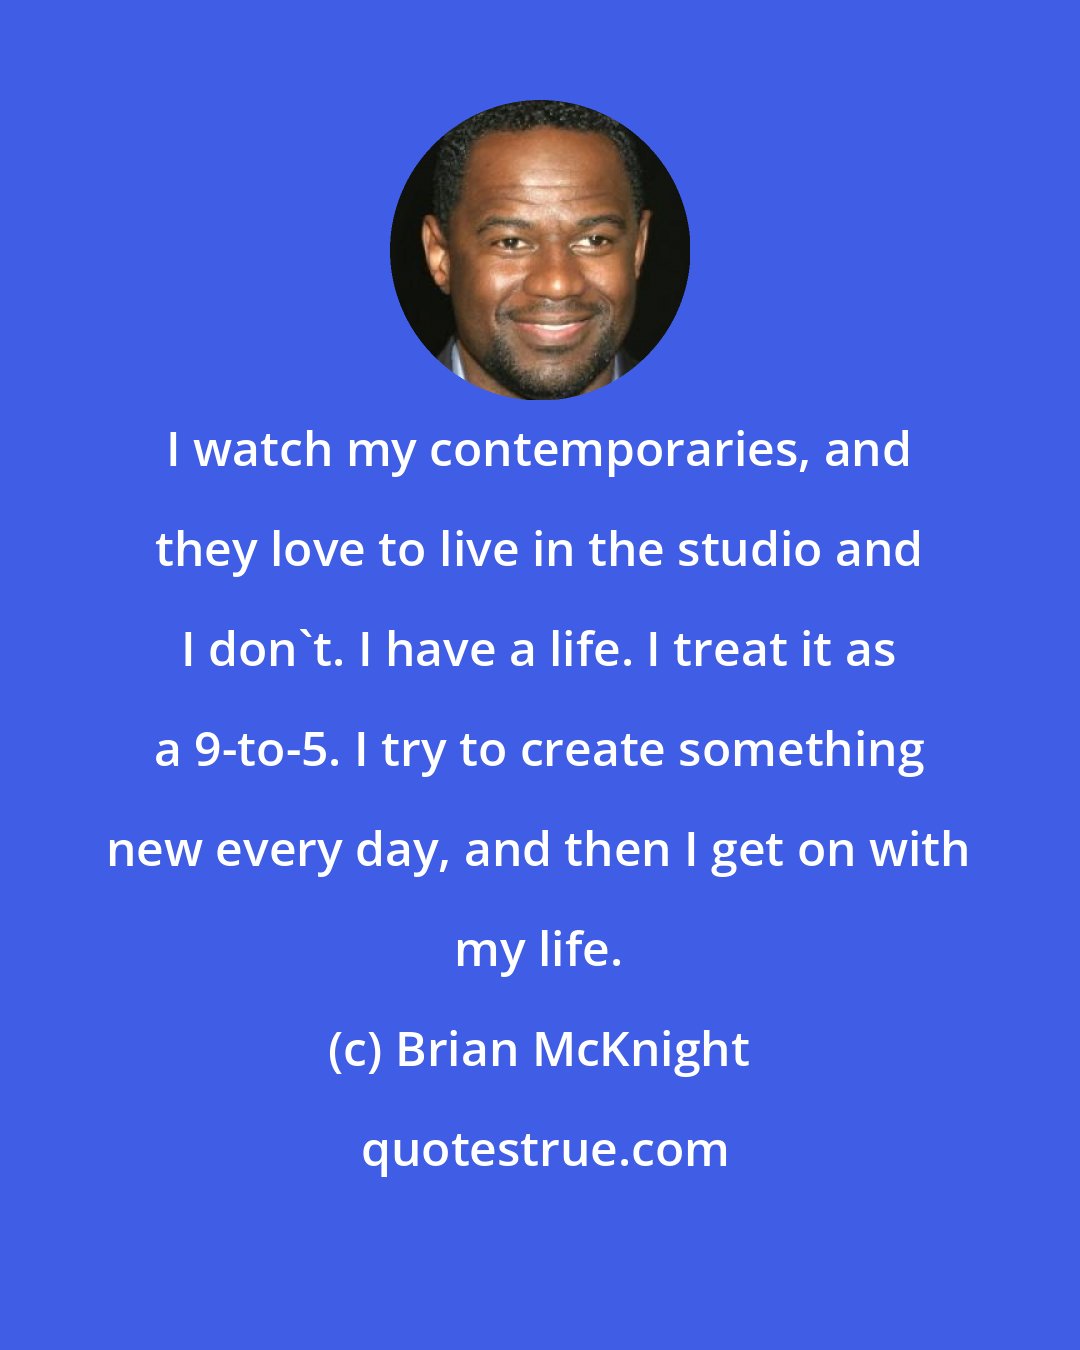 Brian McKnight: I watch my contemporaries, and they love to live in the studio and I don't. I have a life. I treat it as a 9-to-5. I try to create something new every day, and then I get on with my life.